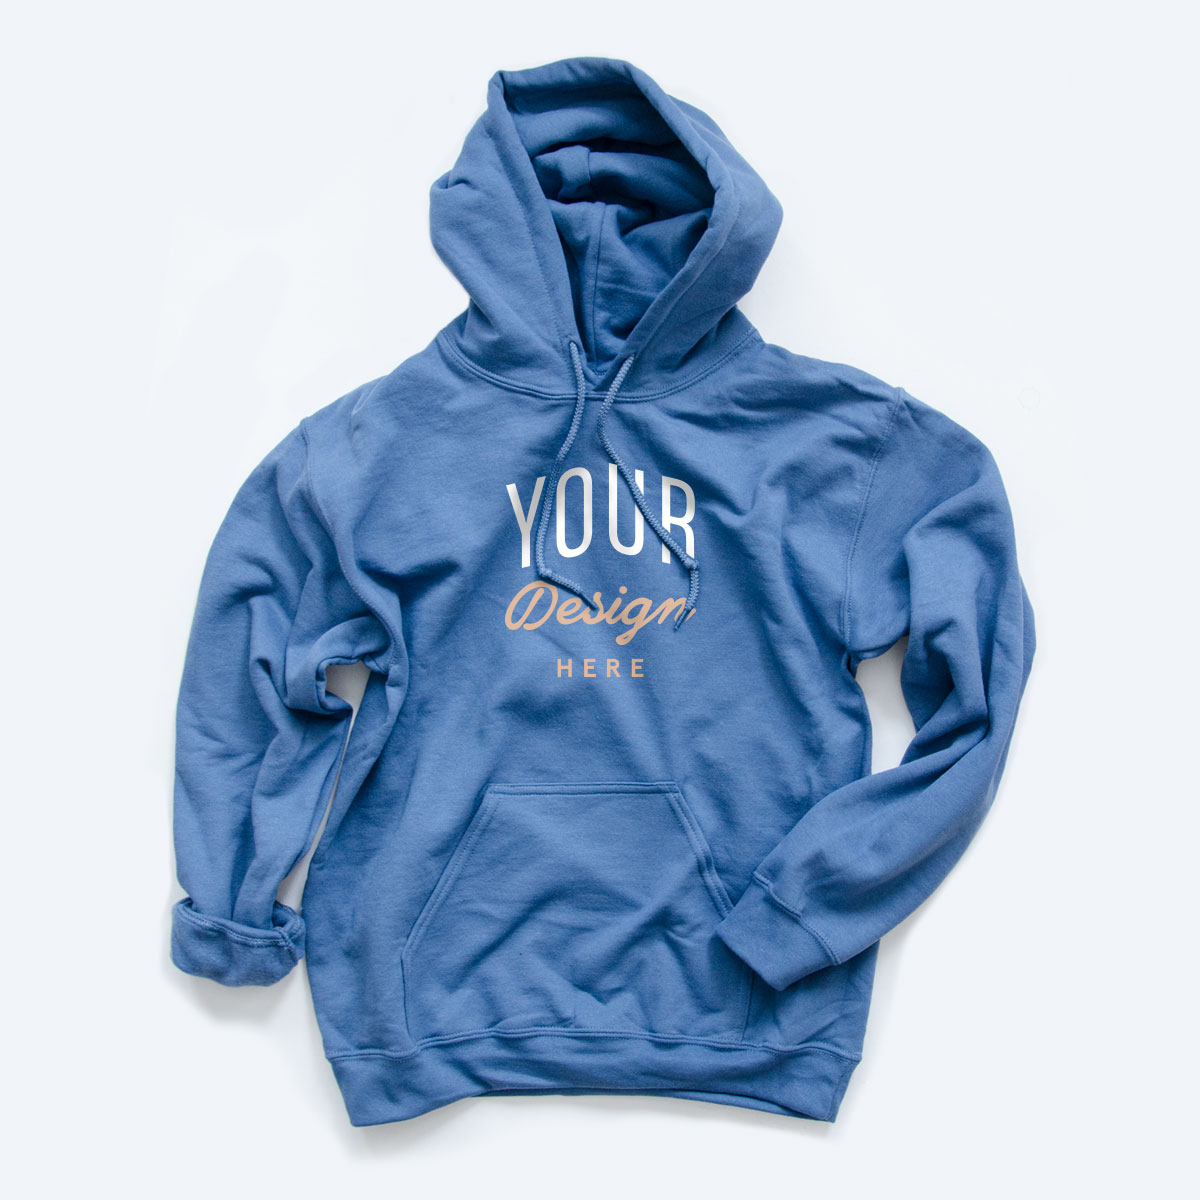 customize your hoodie